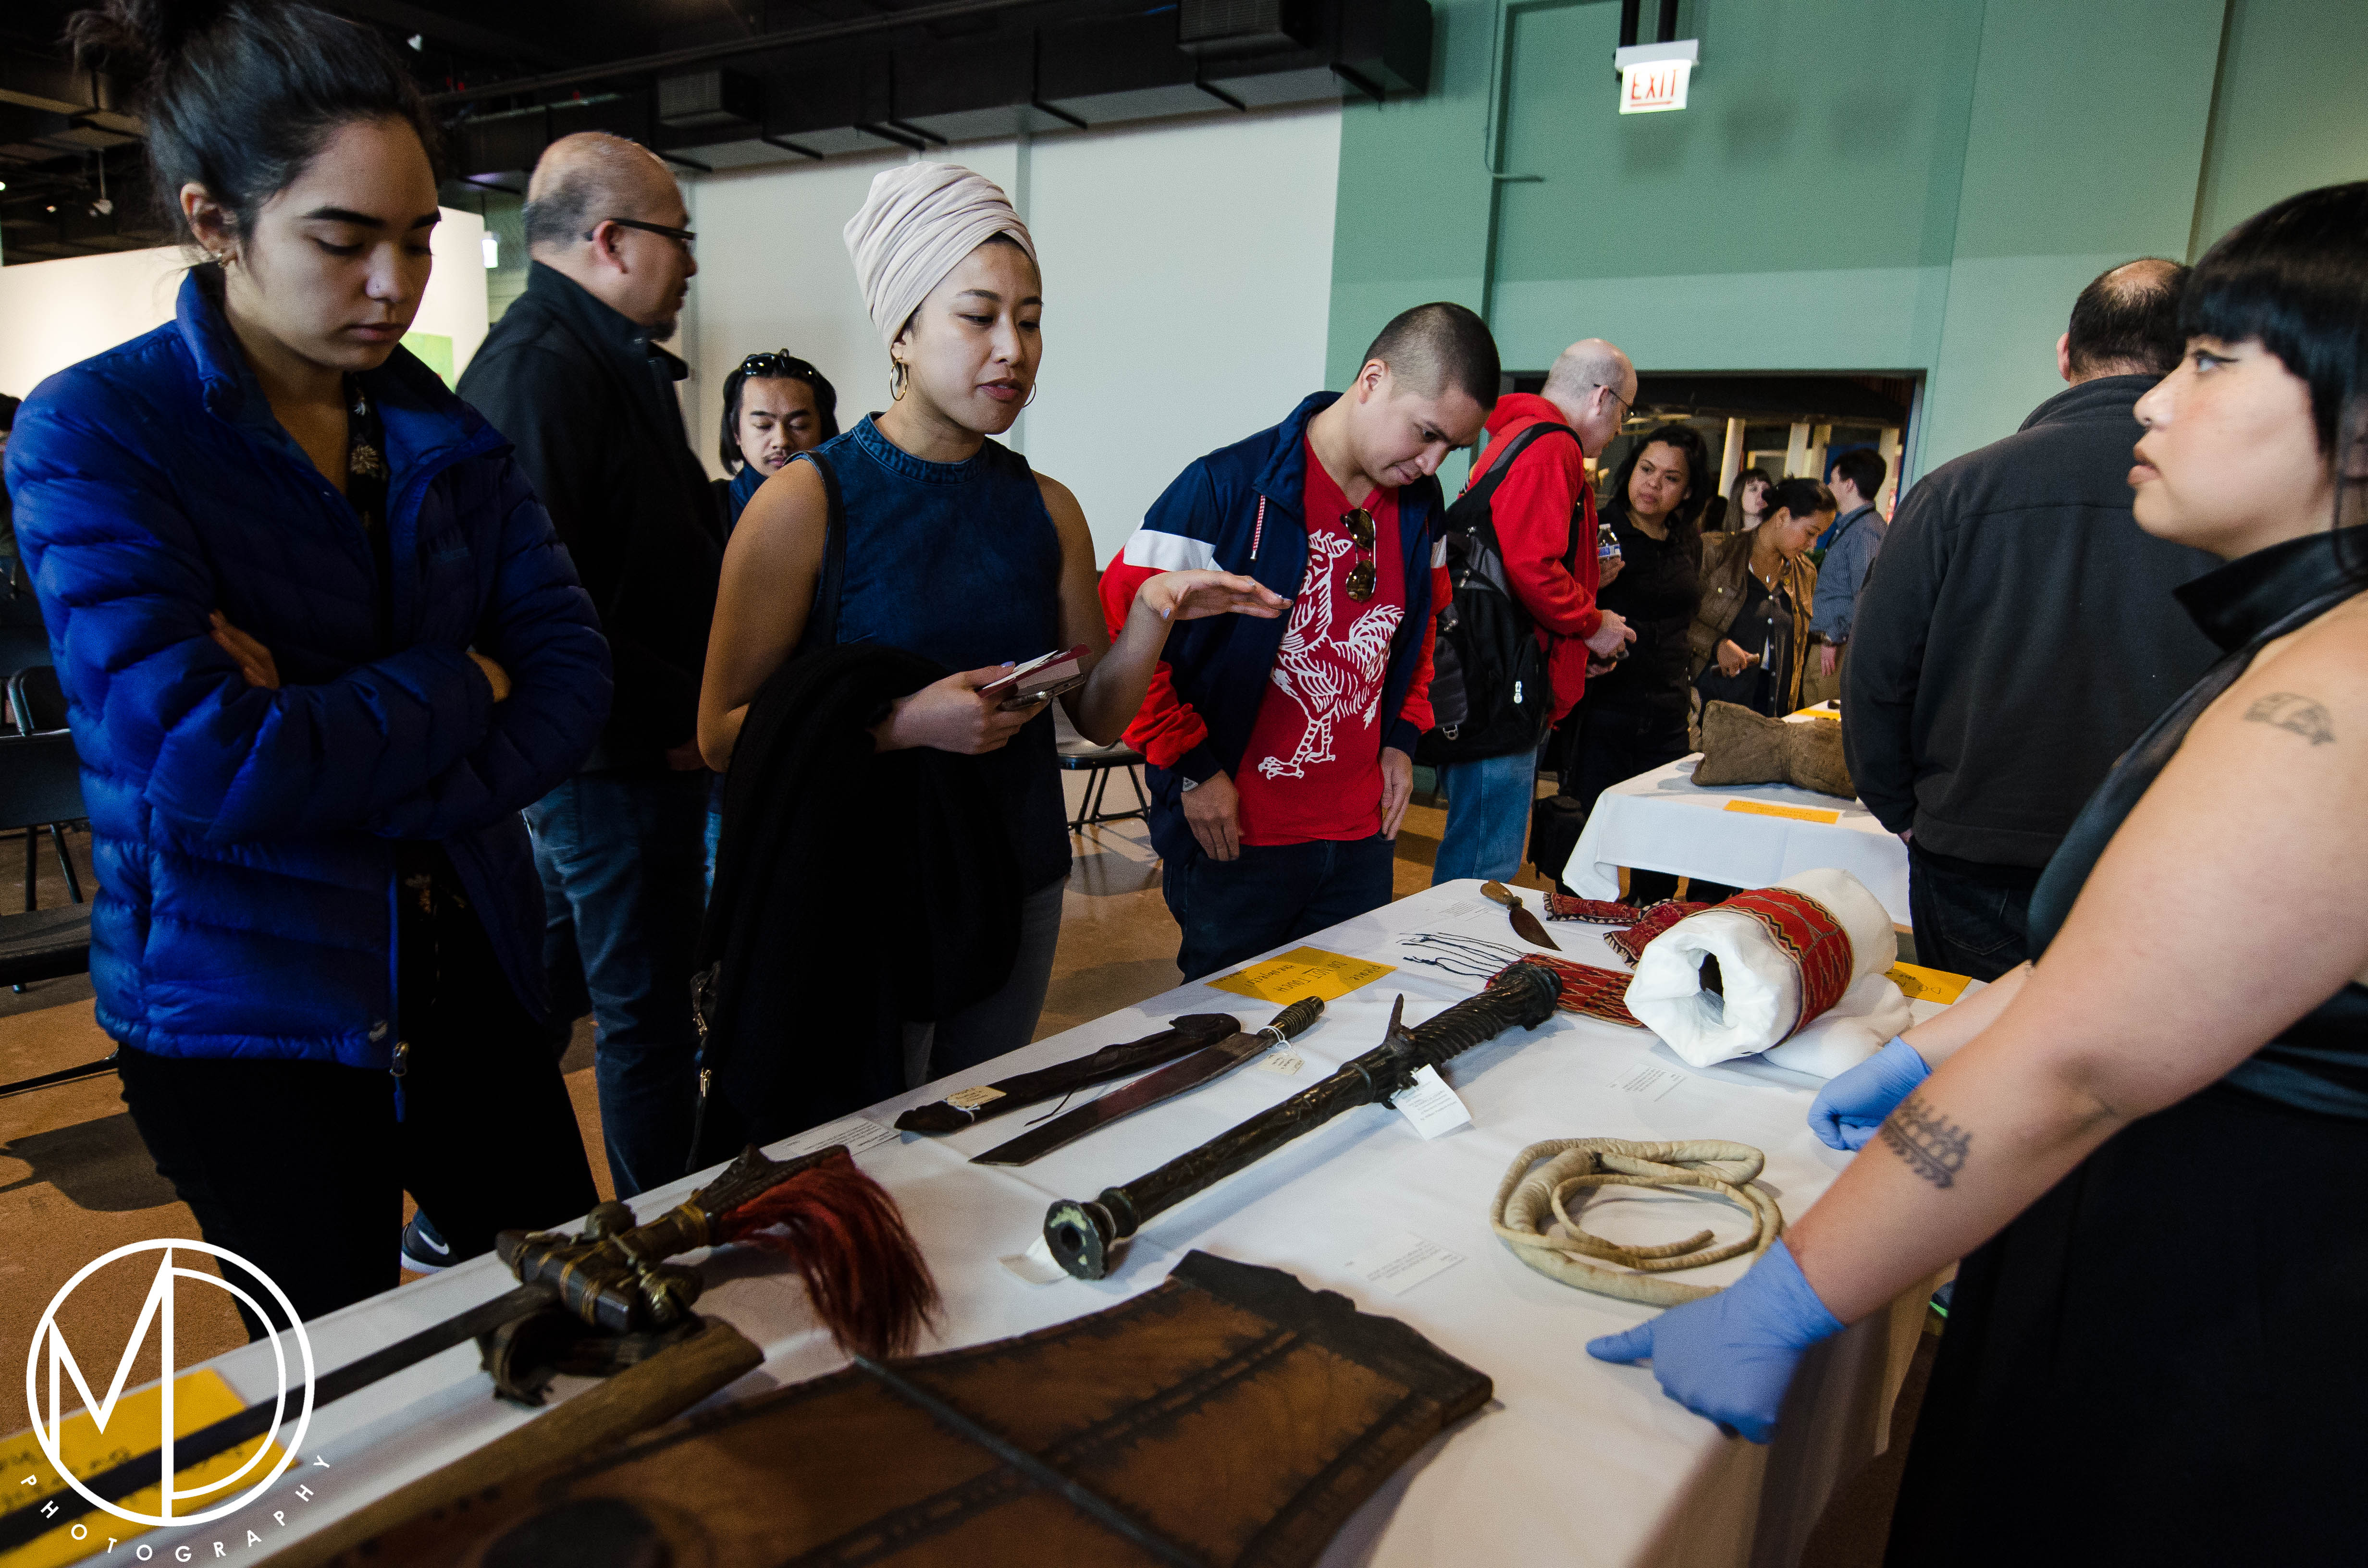 Guests looking at the blades and shields from the collection. (c) Field Museum of Natural History - CC BY-NC 4.0